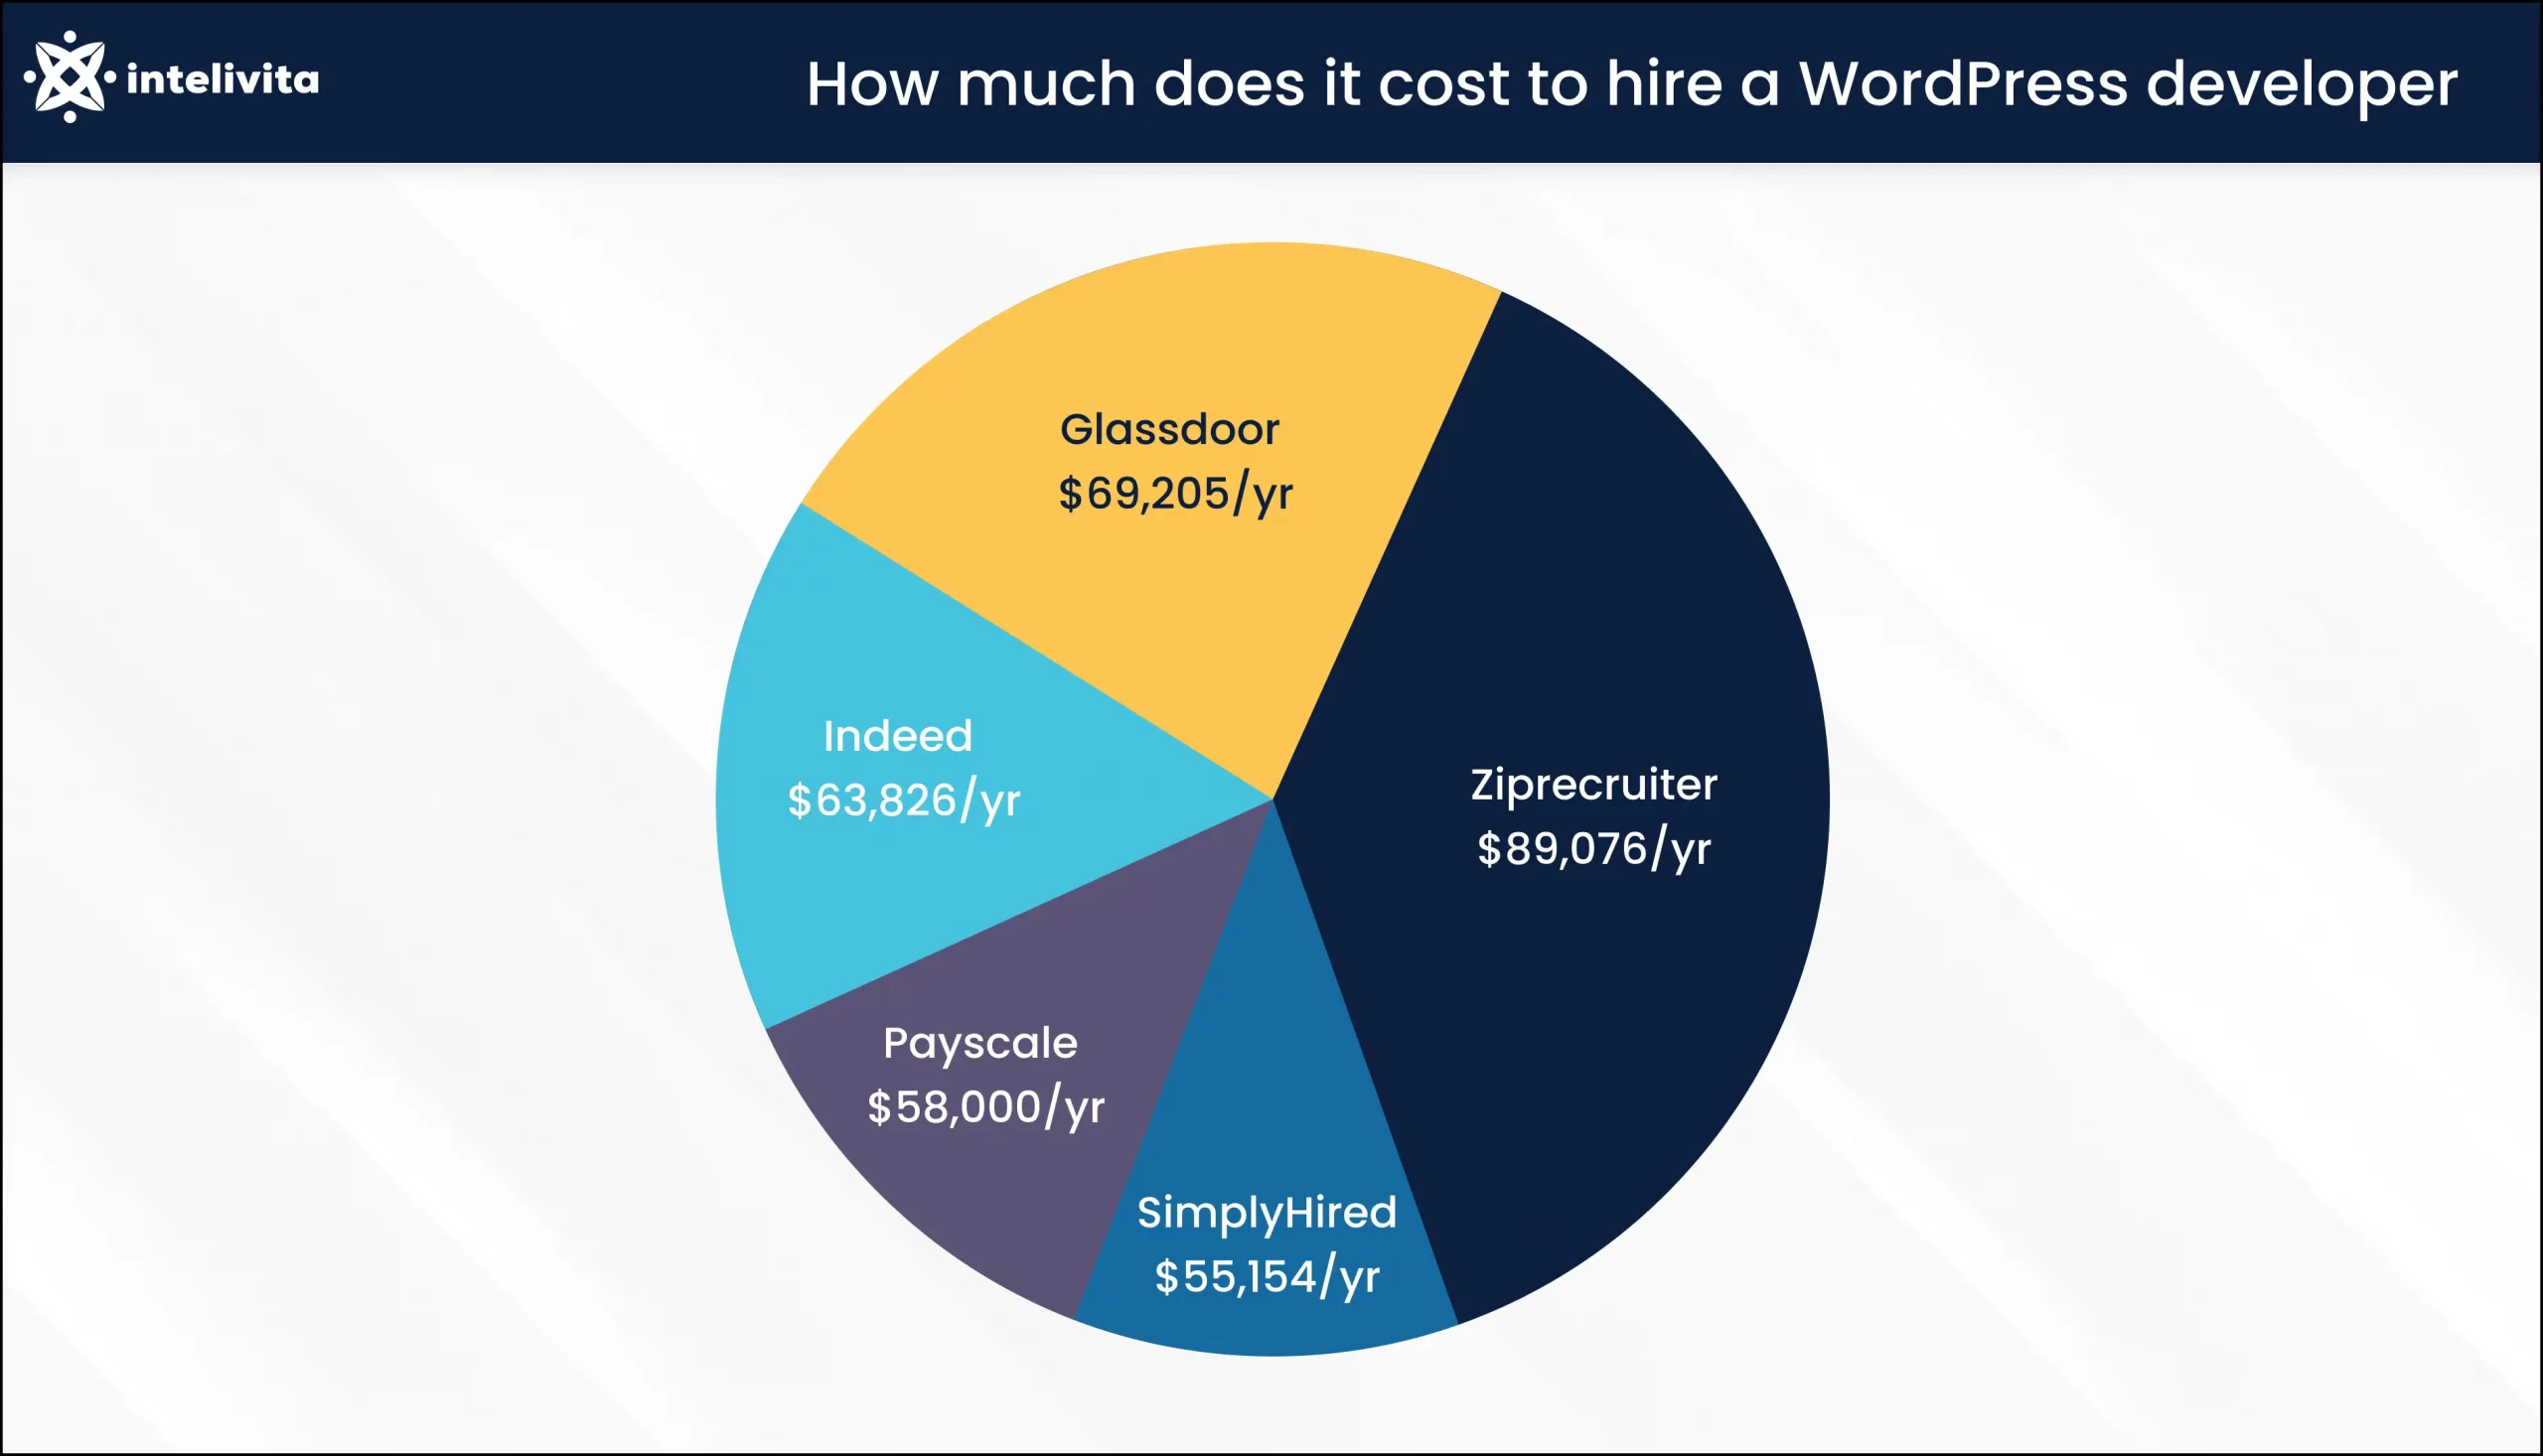 Image showing the cost of hiring a WordPress developer per year on different hiring platforms.